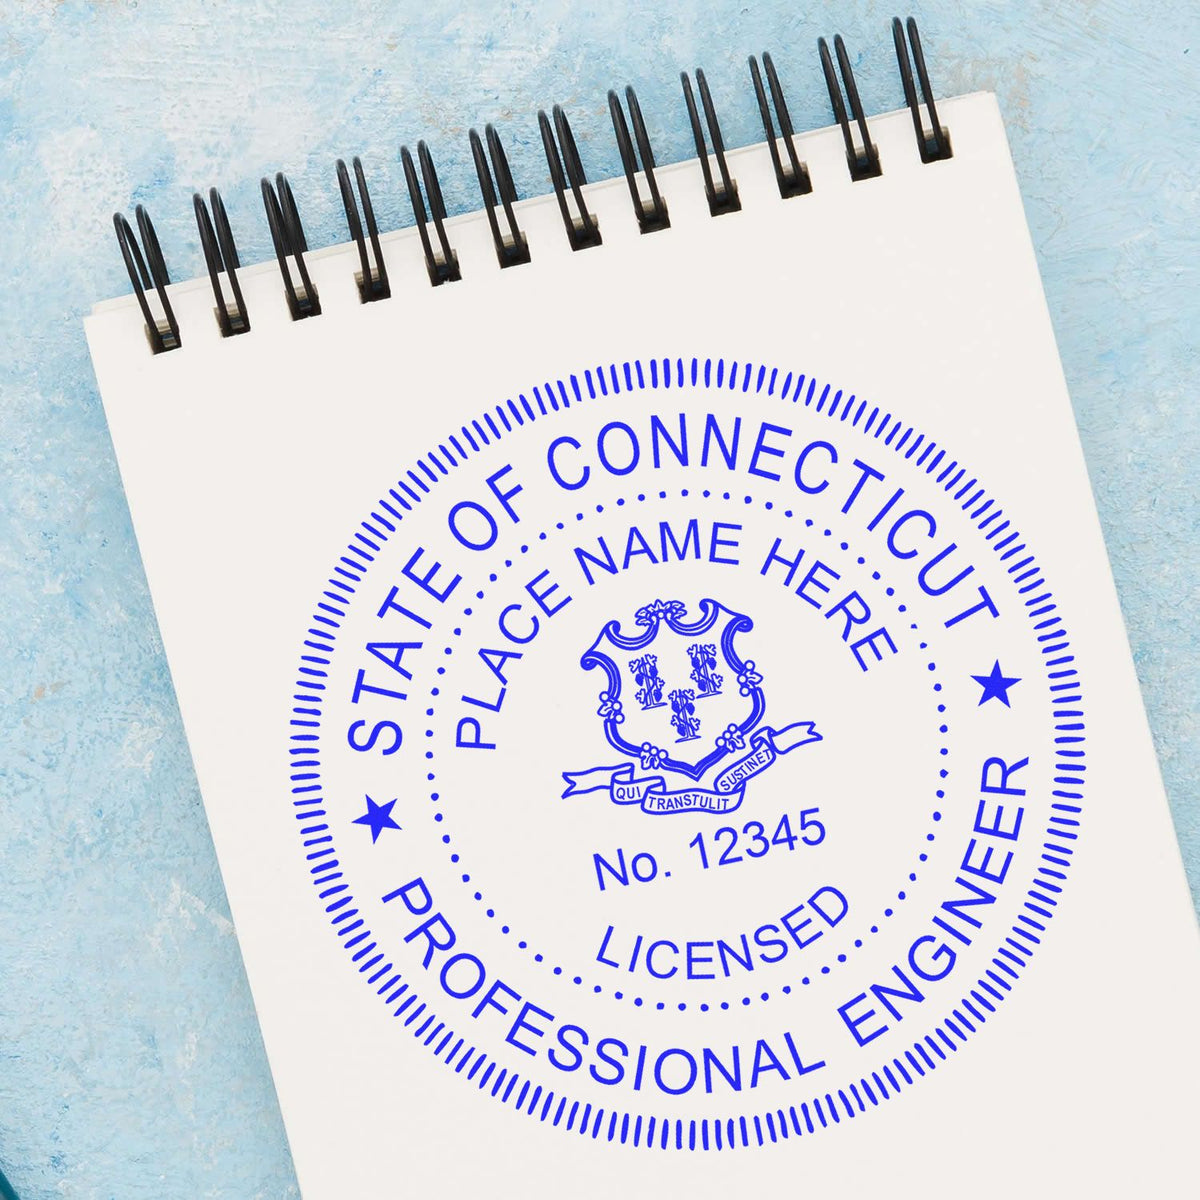 An alternative view of the Connecticut Professional Engineer Seal Stamp stamped on a sheet of paper showing the image in use